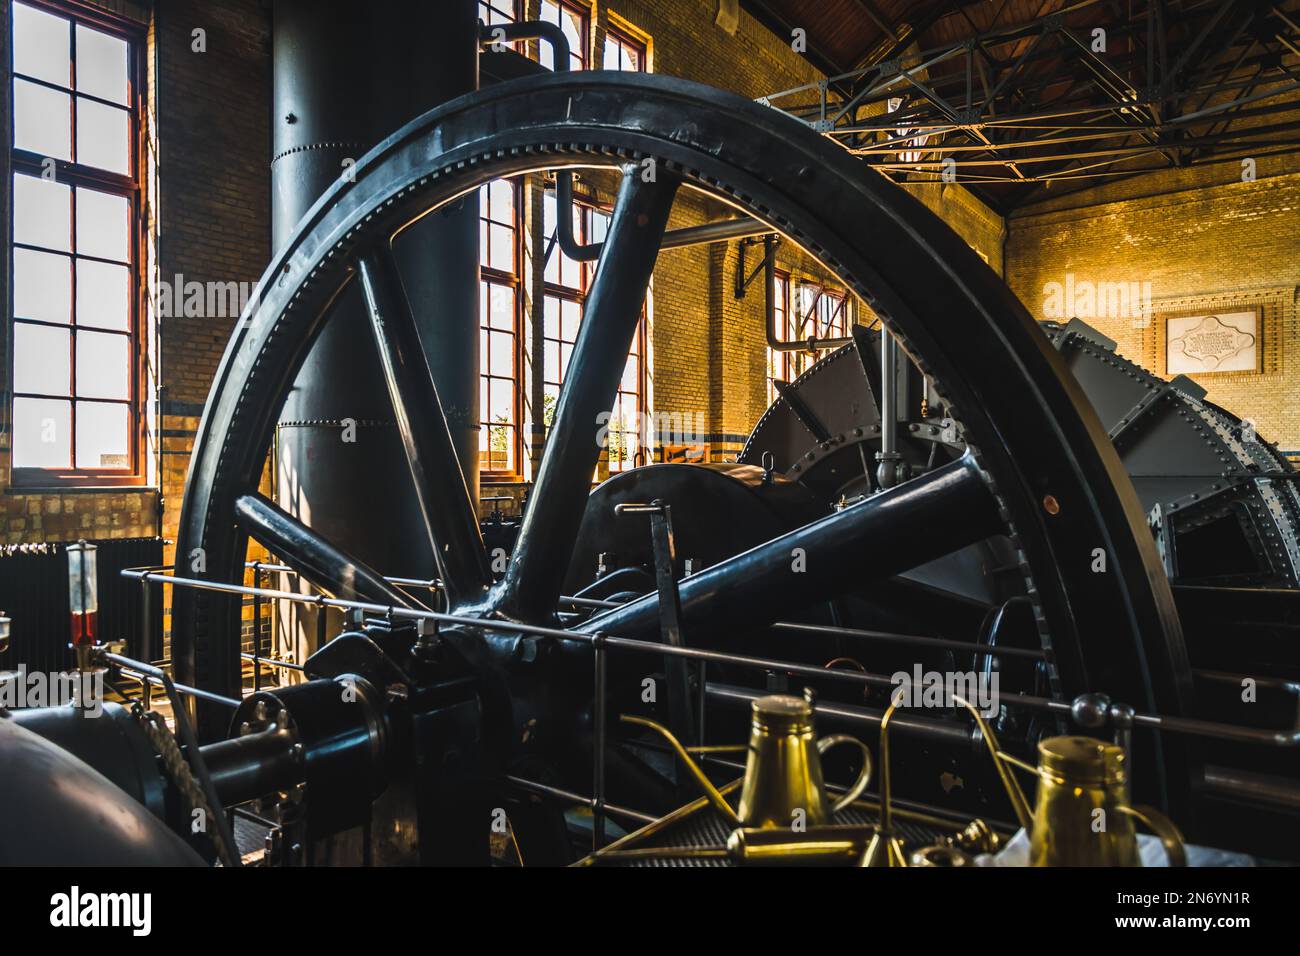 Lemmer, Netherlands - August 11, 2022: Machine hall with turbine in the world's largest steam pumping station in Lemmer, Netherlands. UNESCO World Her Stock Photo